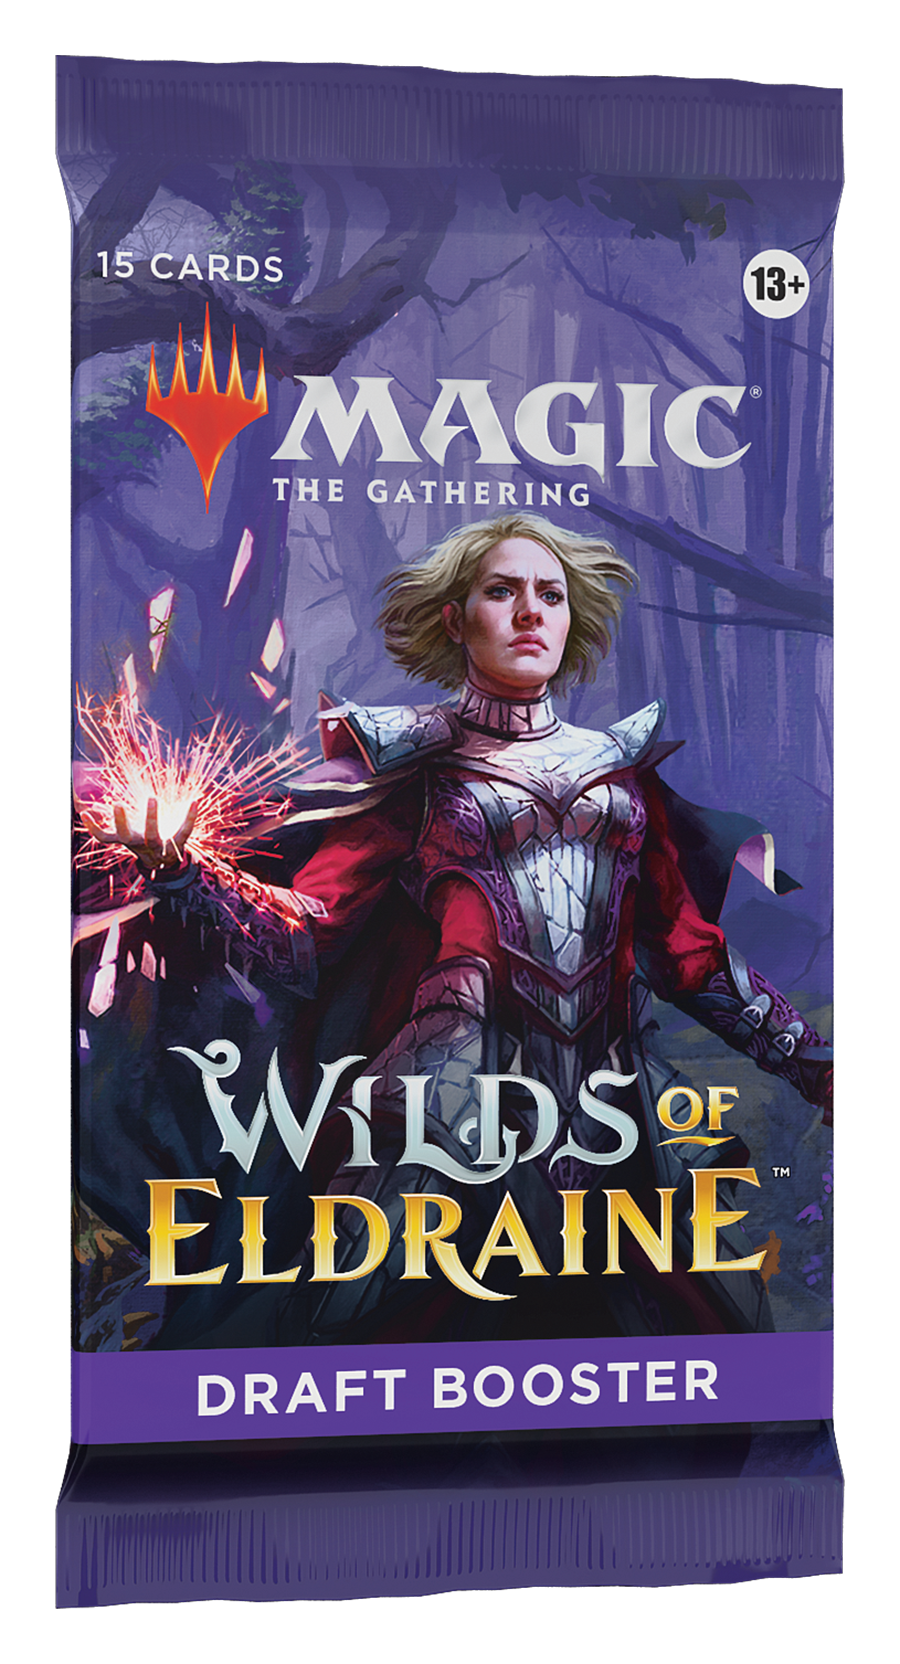 Magic: the Gathering – Wilds of Eldraine Draft Booster